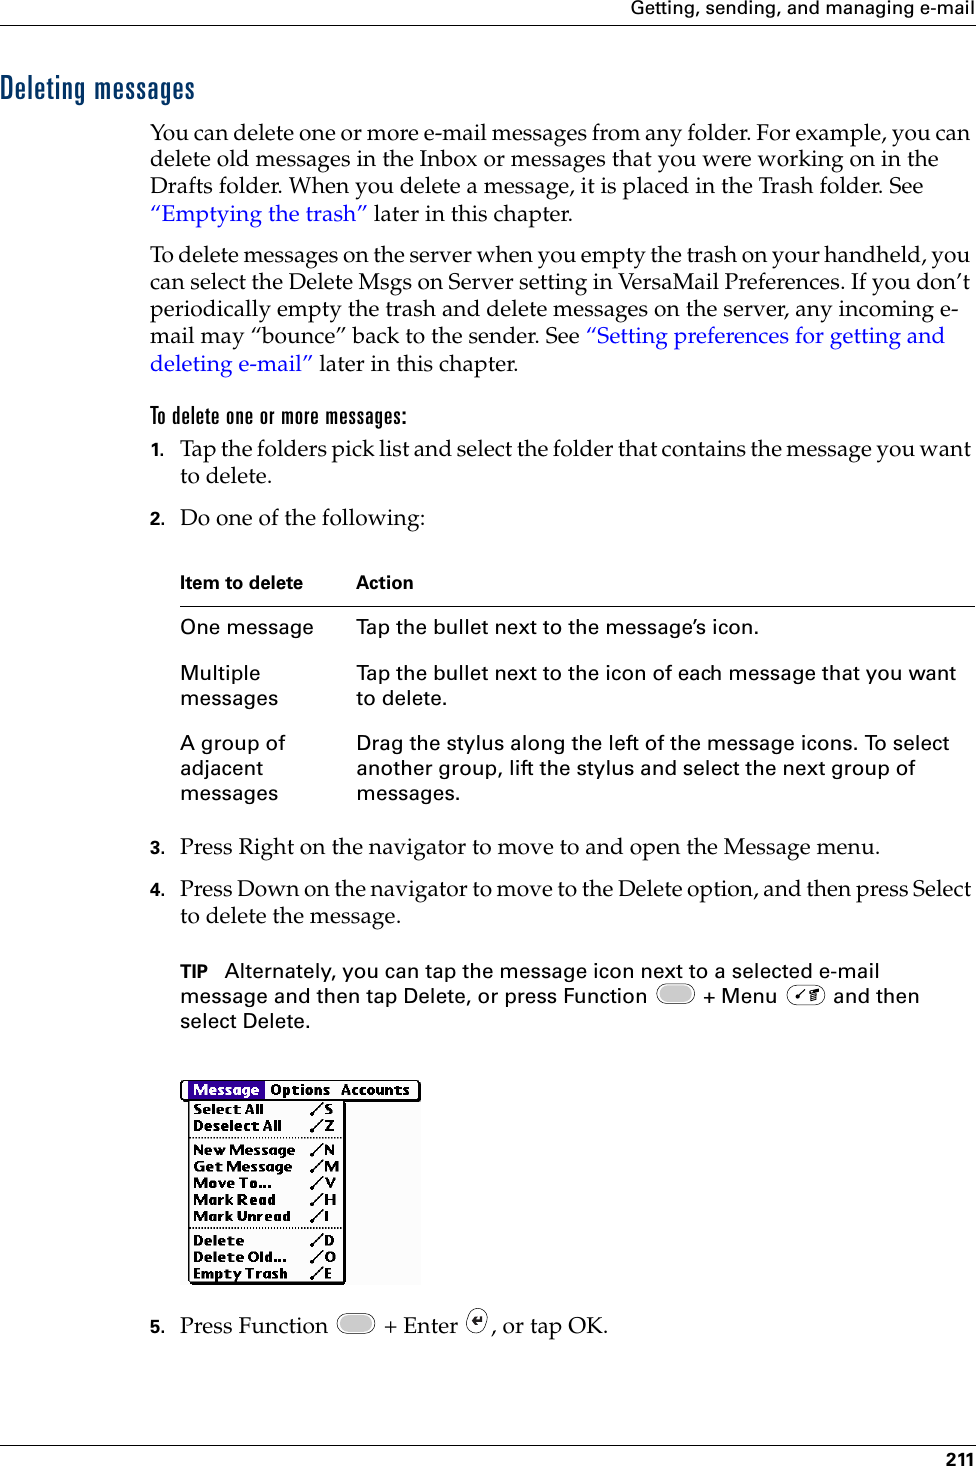 Getting, sending, and managing e-mail211Deleting messagesYou can delete one or more e-mail messages from any folder. For example, you can delete old messages in the Inbox or messages that you were working on in the Drafts folder. When you delete a message, it is placed in the Trash folder. See “Emptying the trash” later in this chapter.To delete messages on the server when you empty the trash on your handheld, you can select the Delete Msgs on Server setting in VersaMail Preferences. If you don’t periodically empty the trash and delete messages on the server, any incoming e-mail may “bounce” back to the sender. See “Setting preferences for getting and deleting e-mail” later in this chapter. To delete one or more messages:1. Tap the folders pick list and select the folder that contains the message you want to delete.2. Do one of the following:3. Press Right on the navigator to move to and open the Message menu.4. Press Down on the navigator to move to the Delete option, and then press Select to delete the message.TIP Alternately, you can tap the message icon next to a selected e-mail message and then tap Delete, or press Function   + Menu   and then select Delete. 5. Press Function   + Enter  , or tap OK.Item to delete ActionOne message Tap the bullet next to the message’s icon.Multiple messagesTap the bullet next to the icon of each message that you want to delete.A group of adjacent messagesDrag the stylus along the left of the message icons. To select another group, lift the stylus and select the next group of messages. Palm, Inc. Confidential